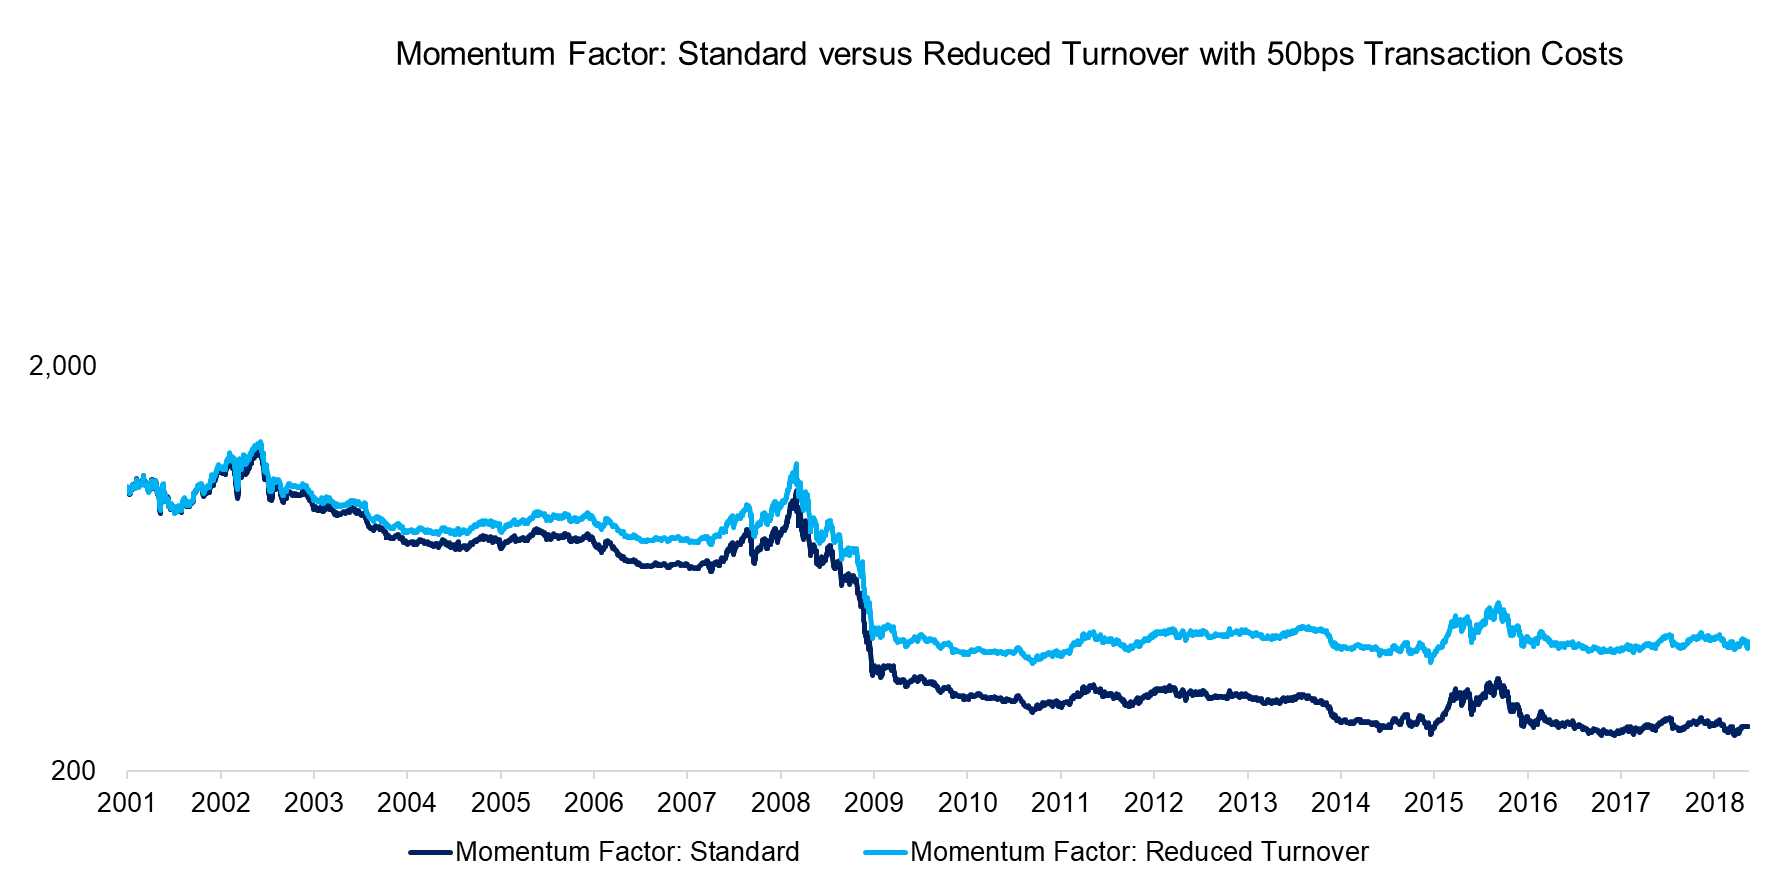 Momentum Factor Standard versus Reduced Turnover with 50bps Transaction Cost